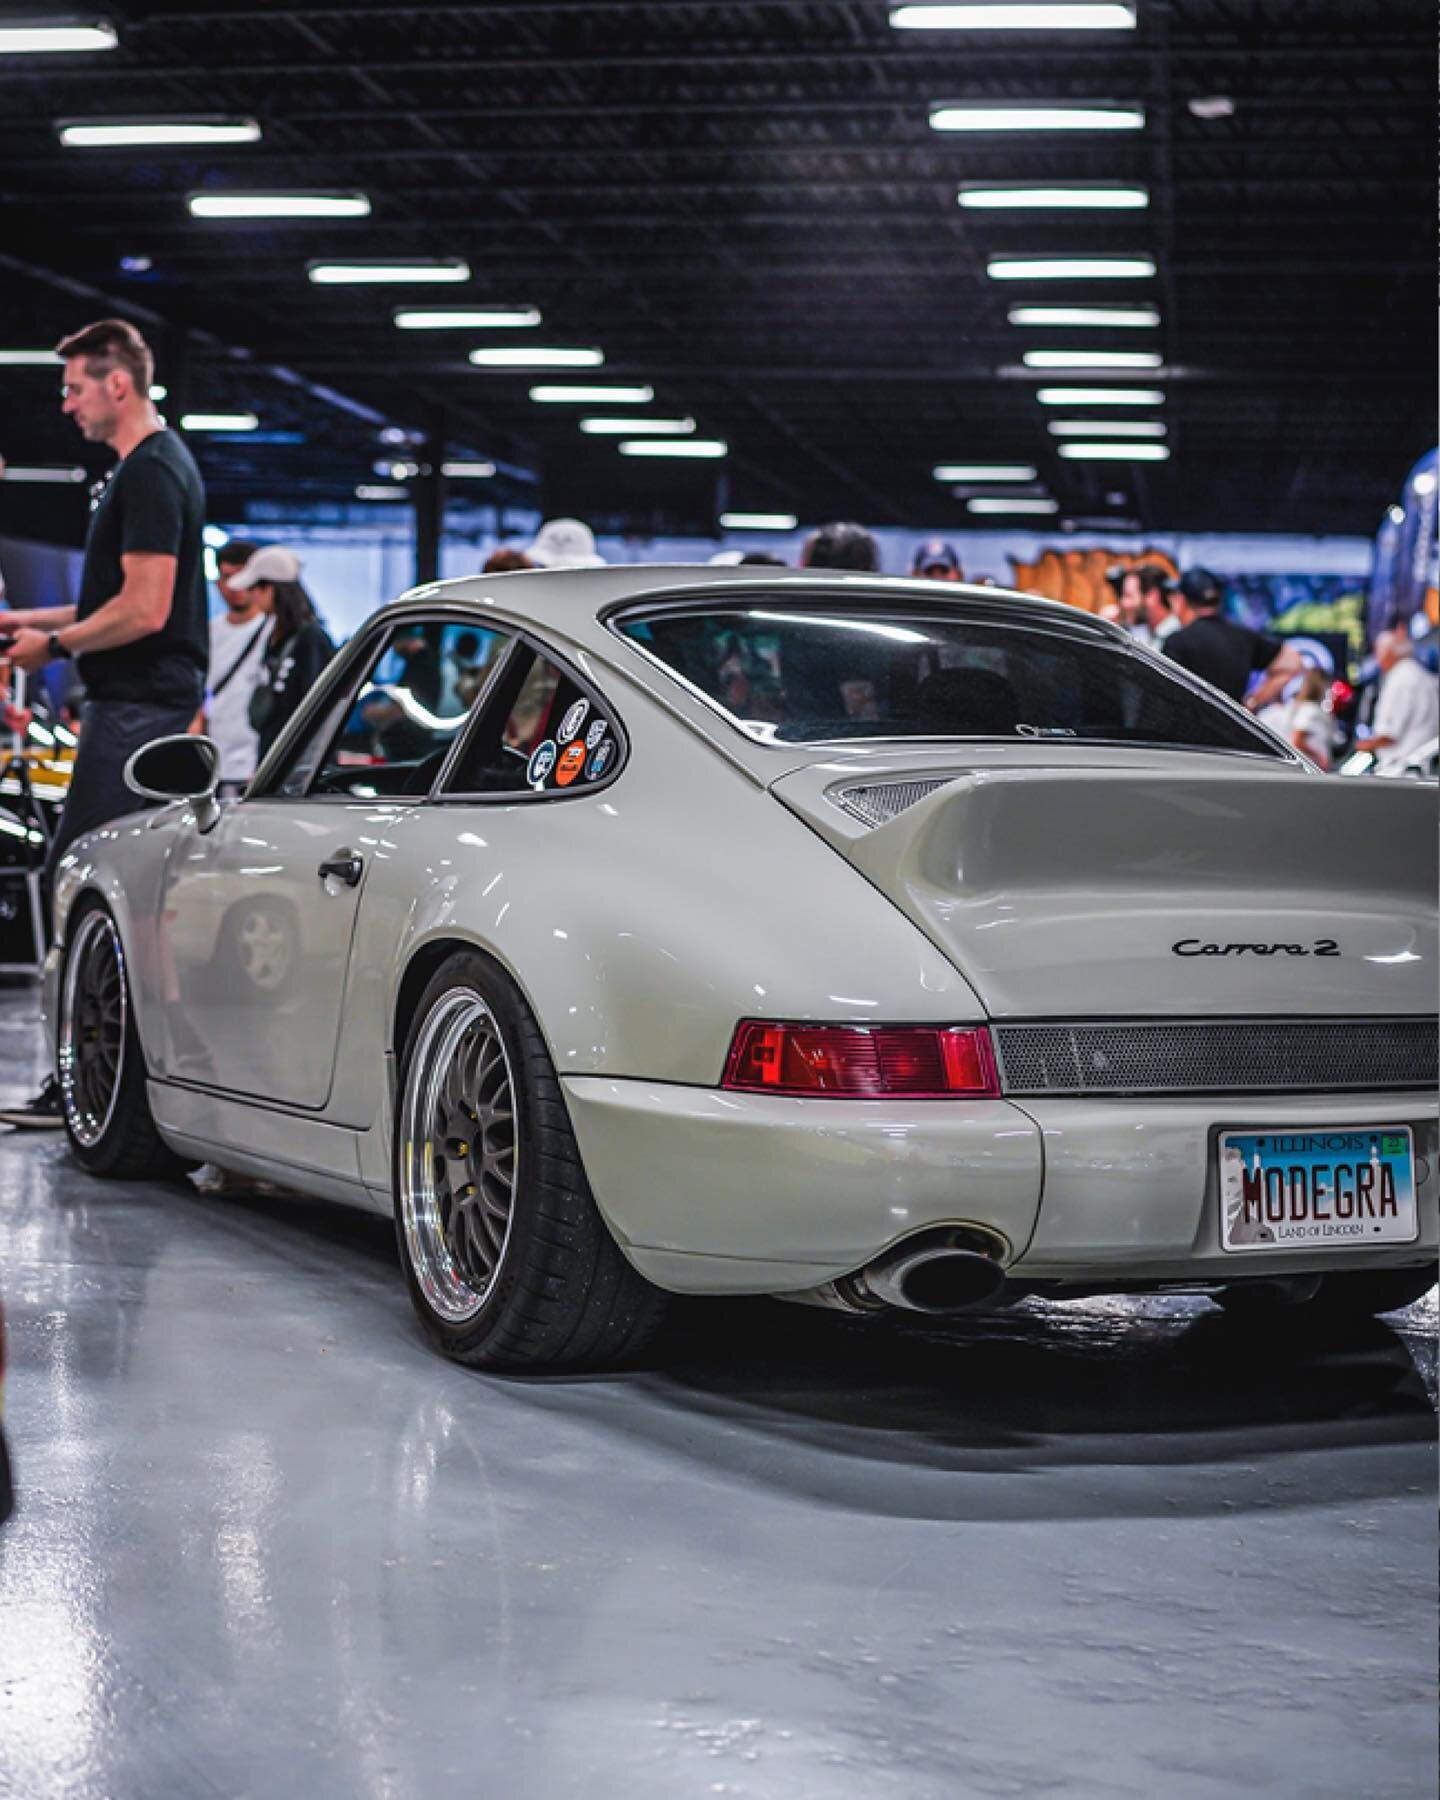 This Fashion Gray 964 was a show stopper at #Check22. Loving what @olsenmotorsport put together on this build.